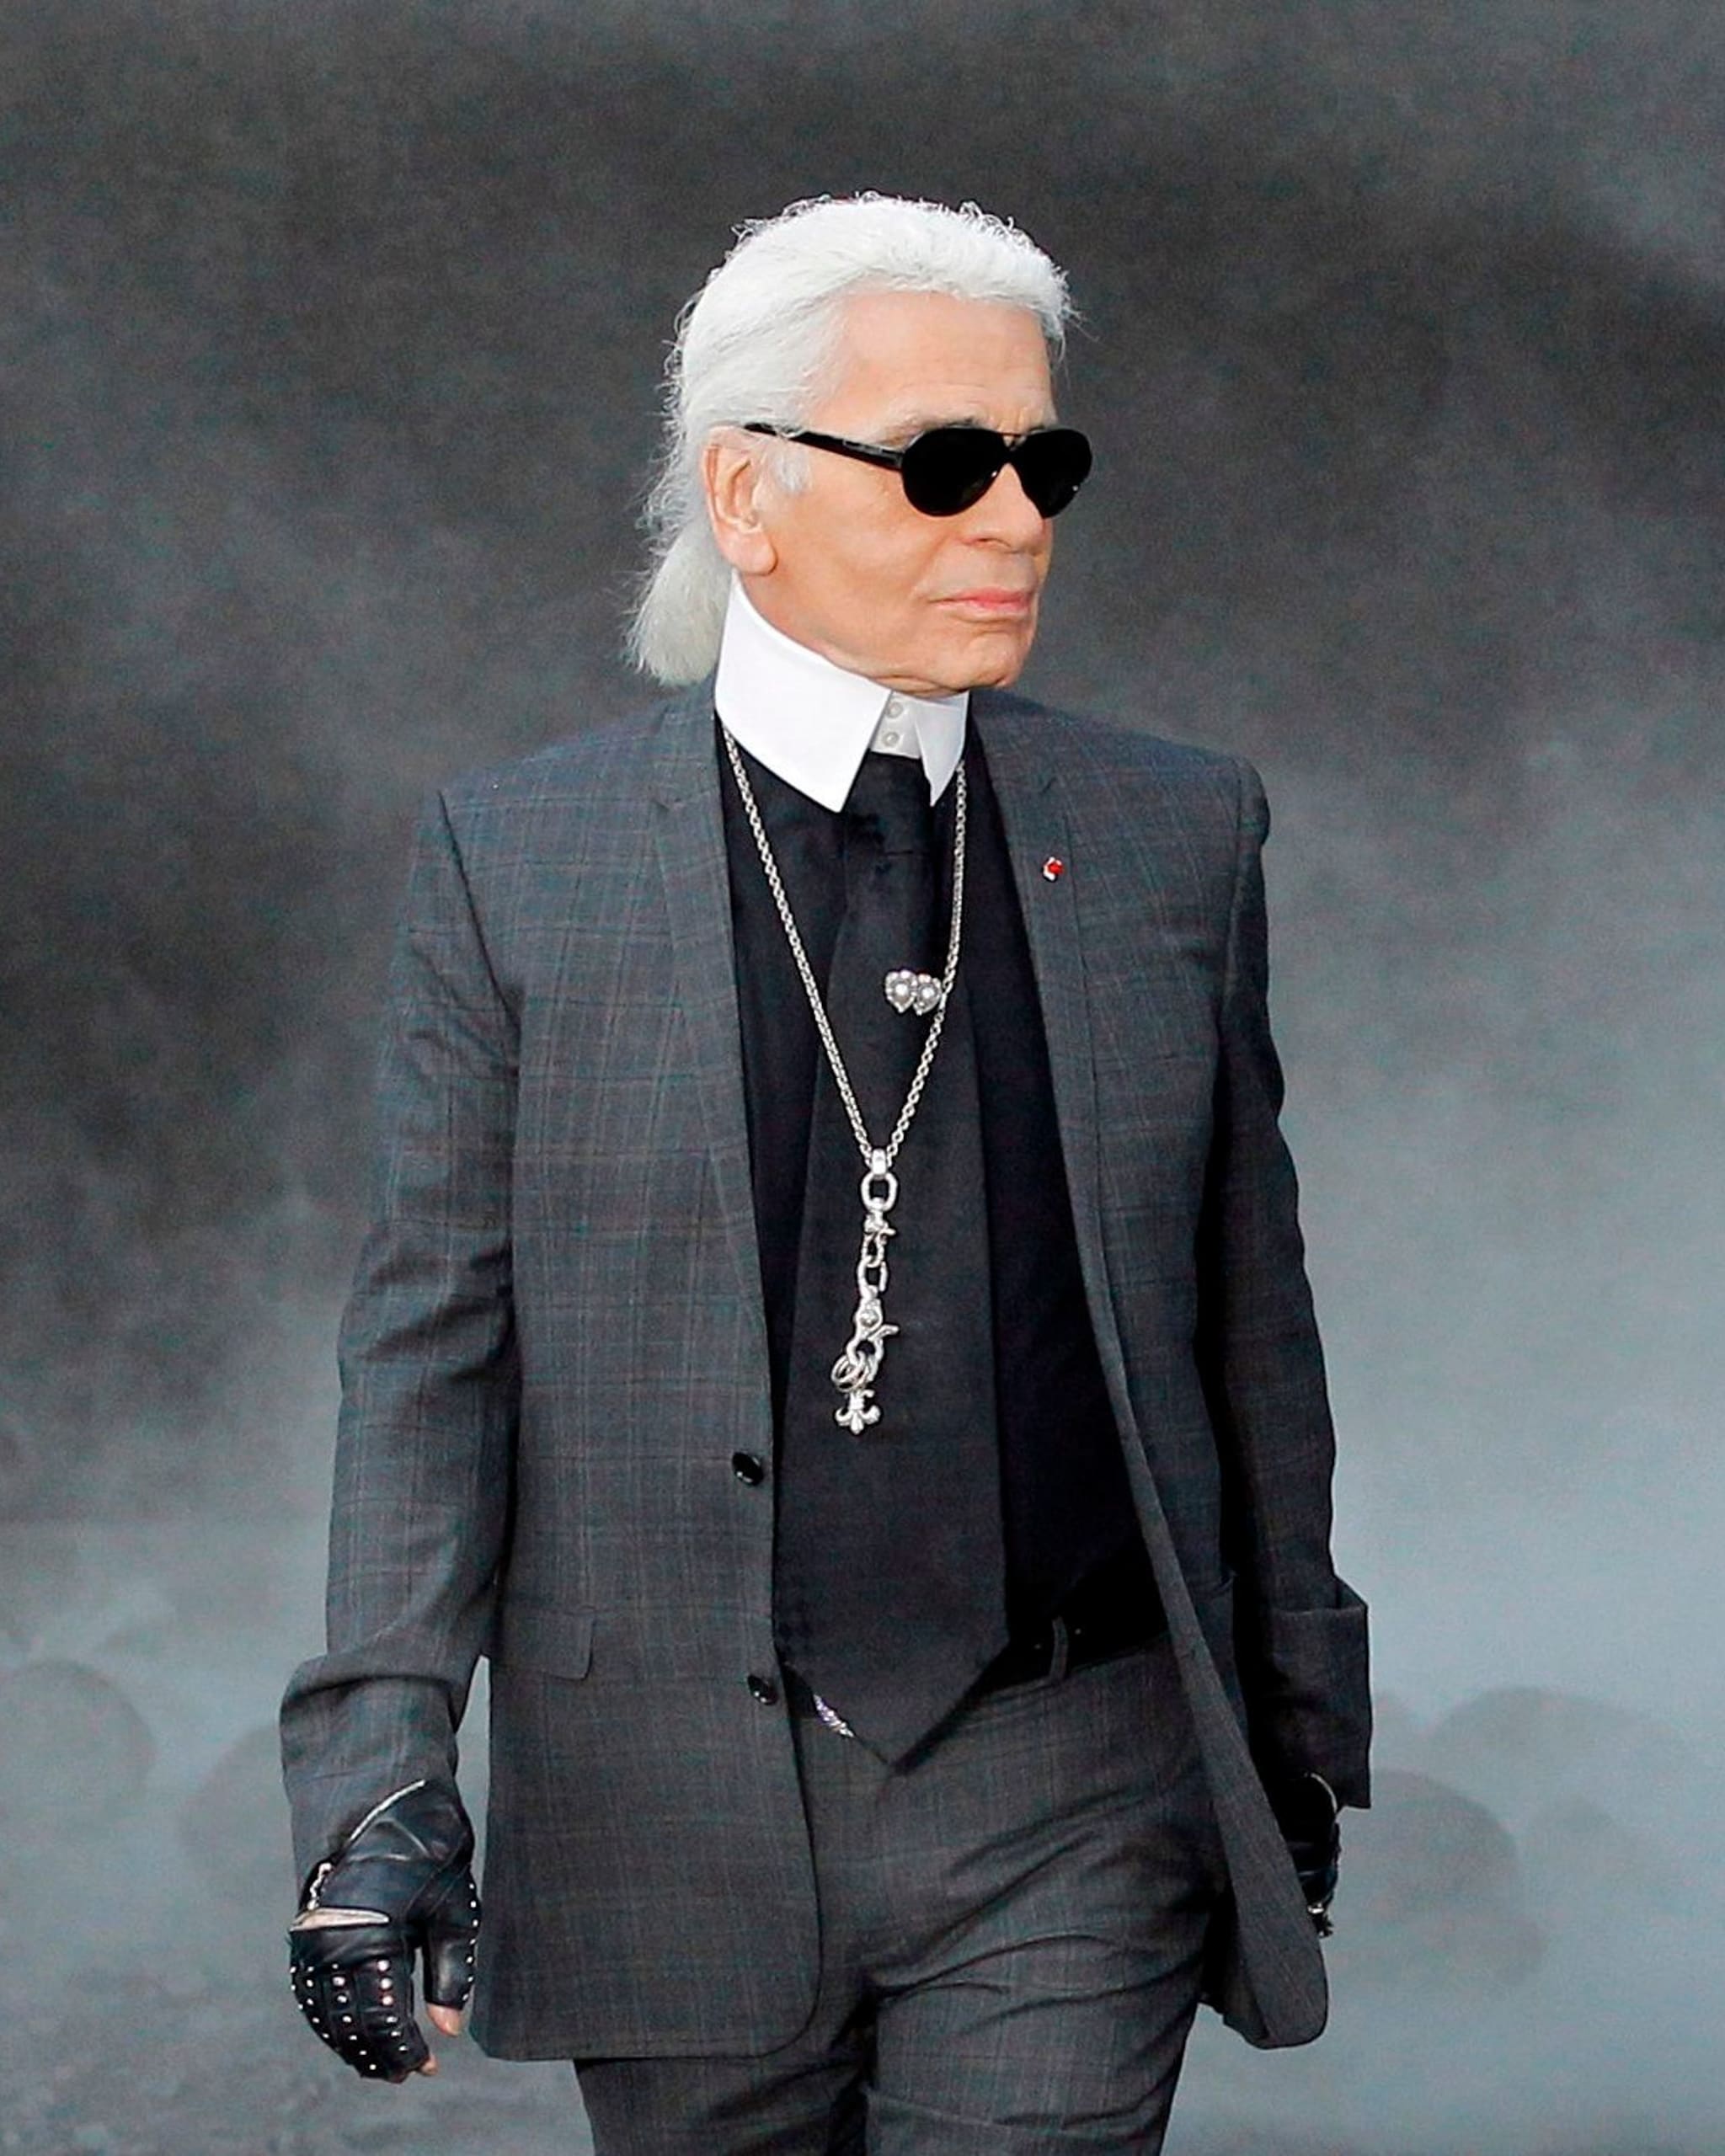 The Story Behind Karl Lagerfeld’s Iconic Ponytail